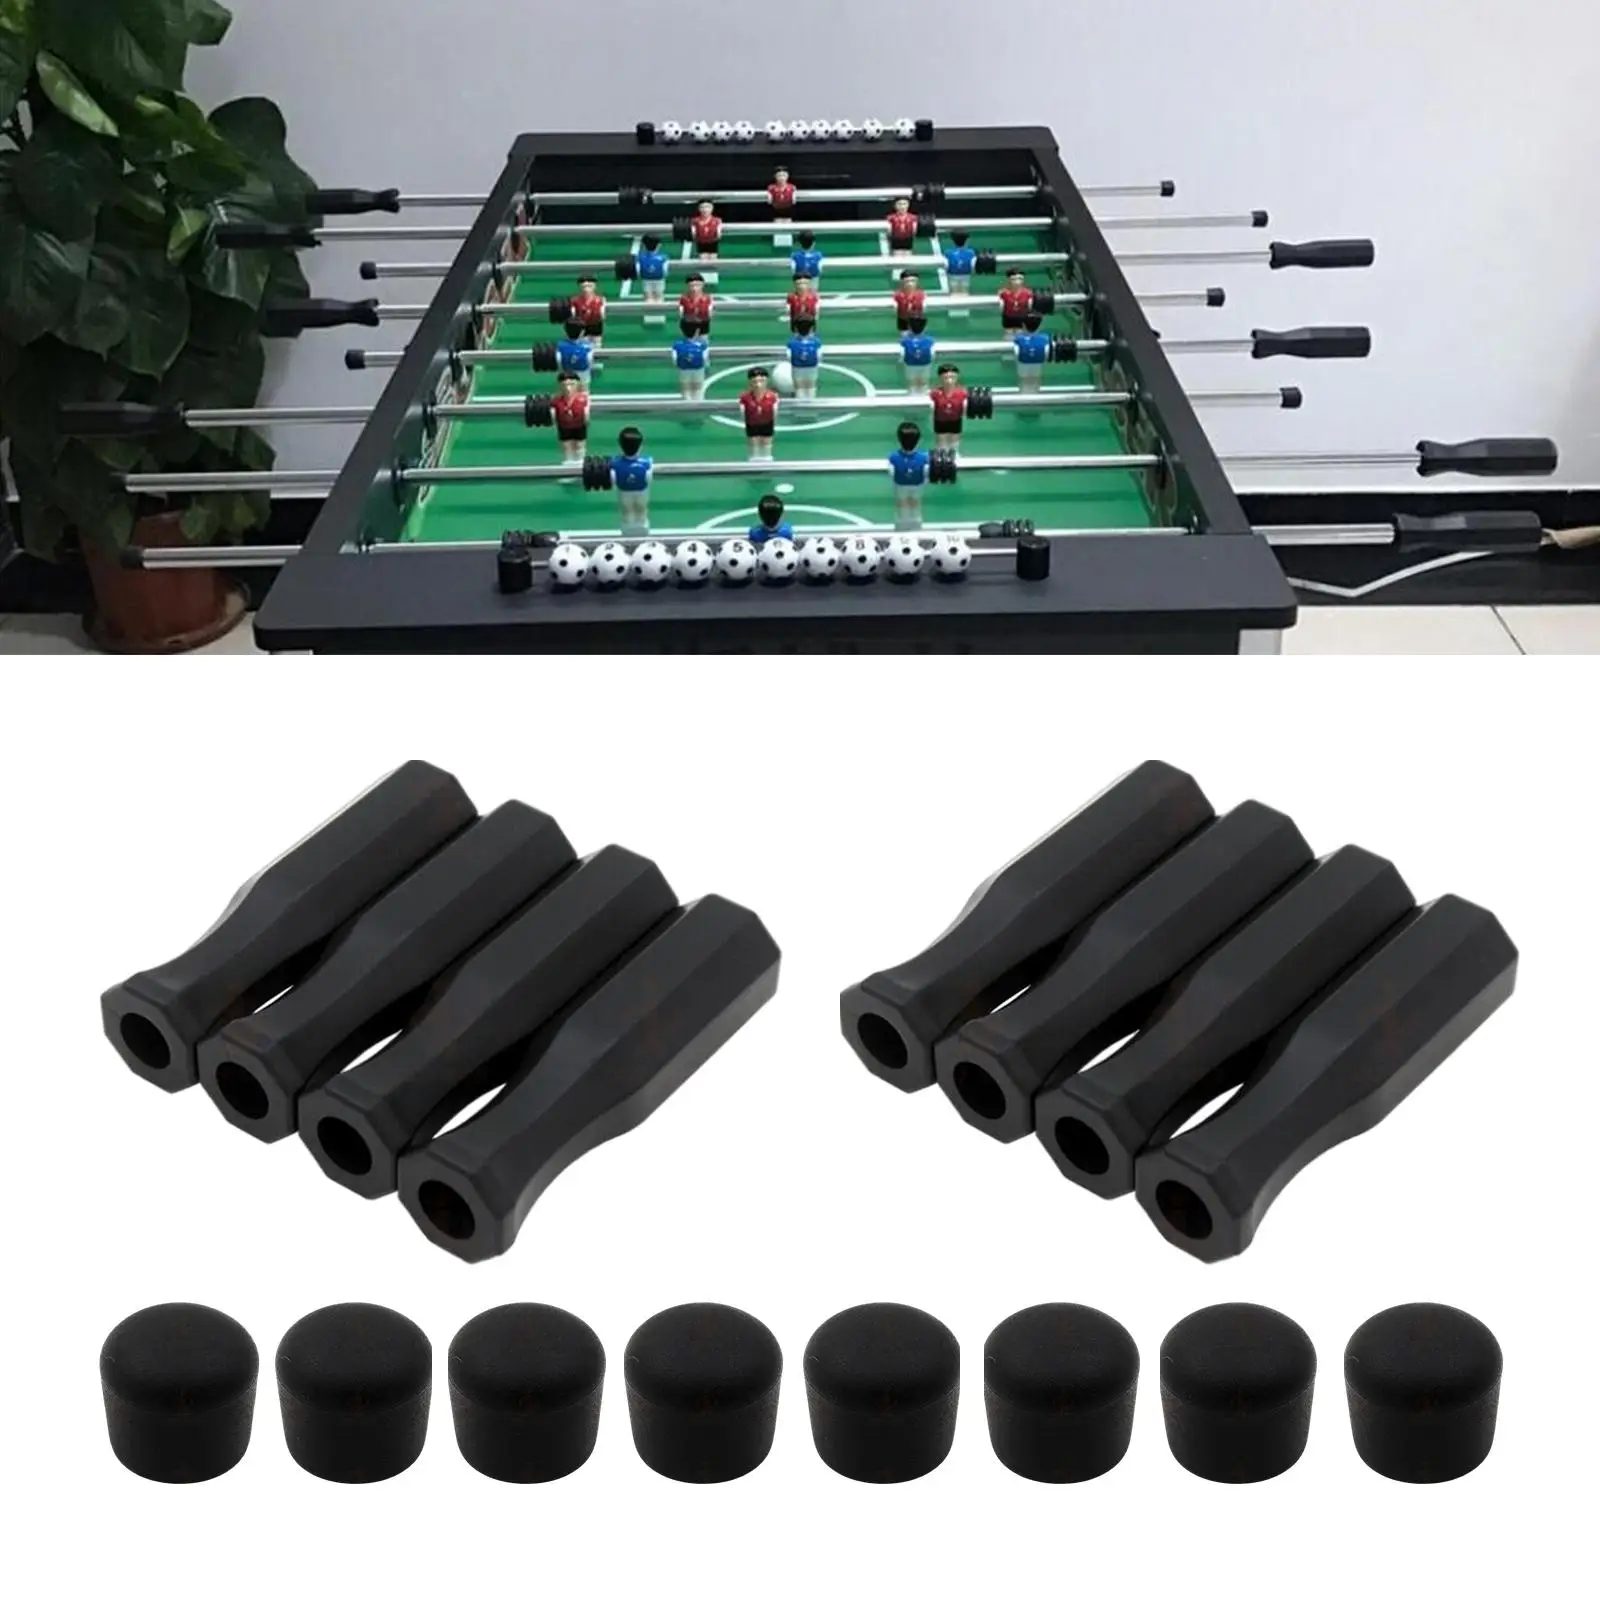 Pack of 16 Octagonal Handles and Safety End Caps Non-Slip Design Part , Black Foosball Rods Grips for Standard Foosball Tables